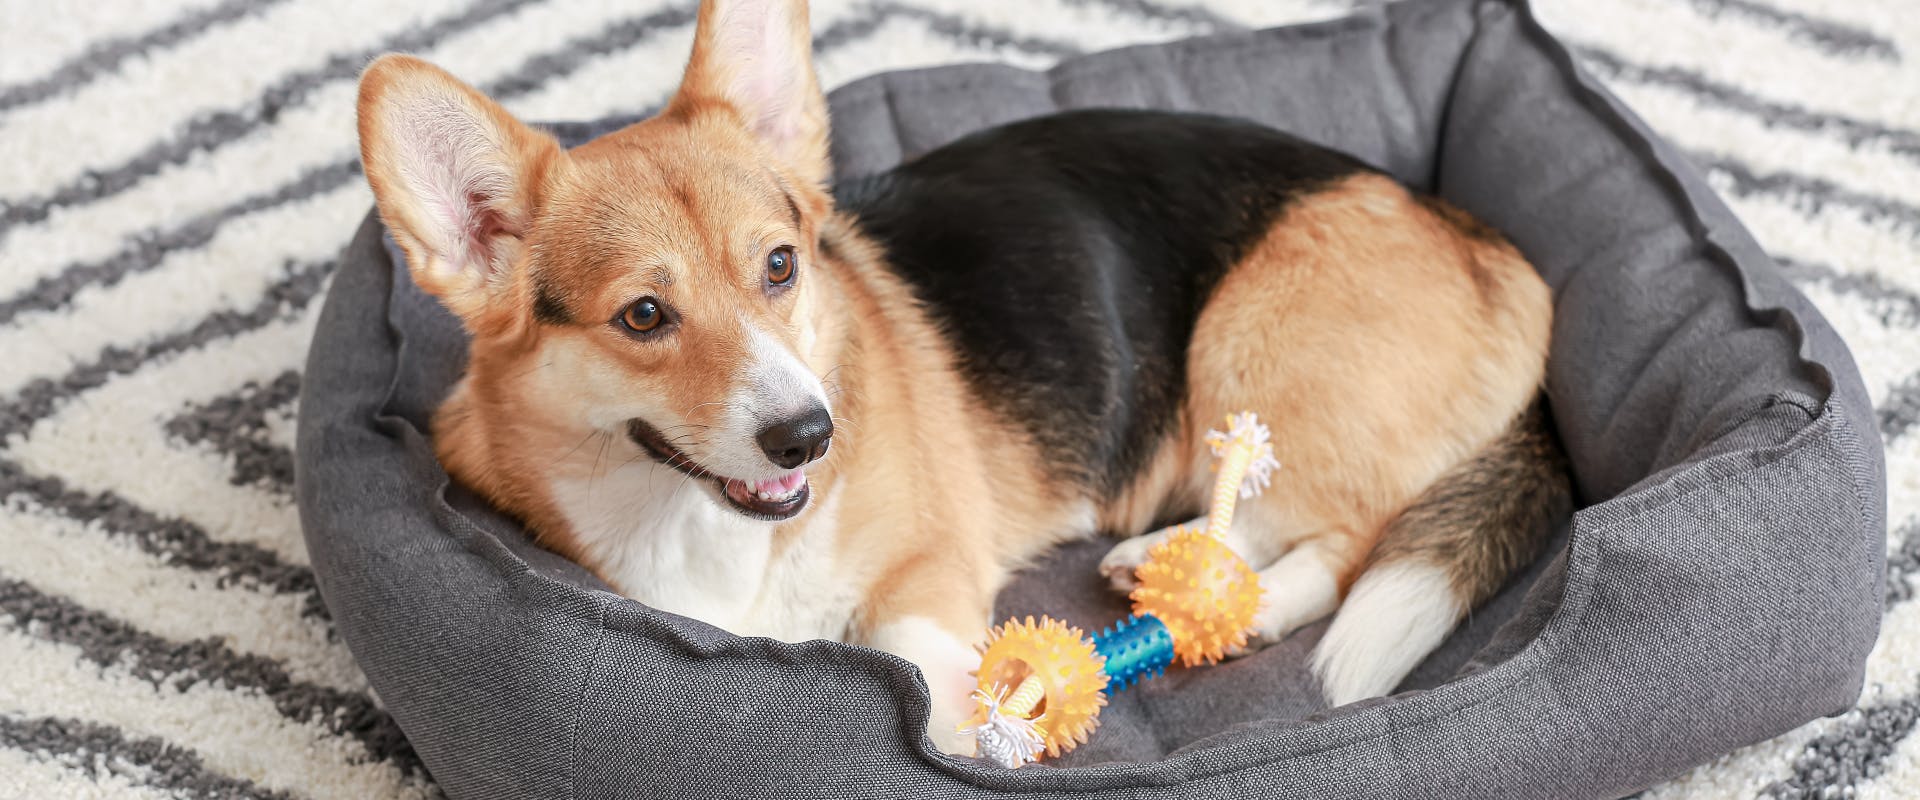 a dog puzzle toy for small dogs lies next to a corgi in a dog bed